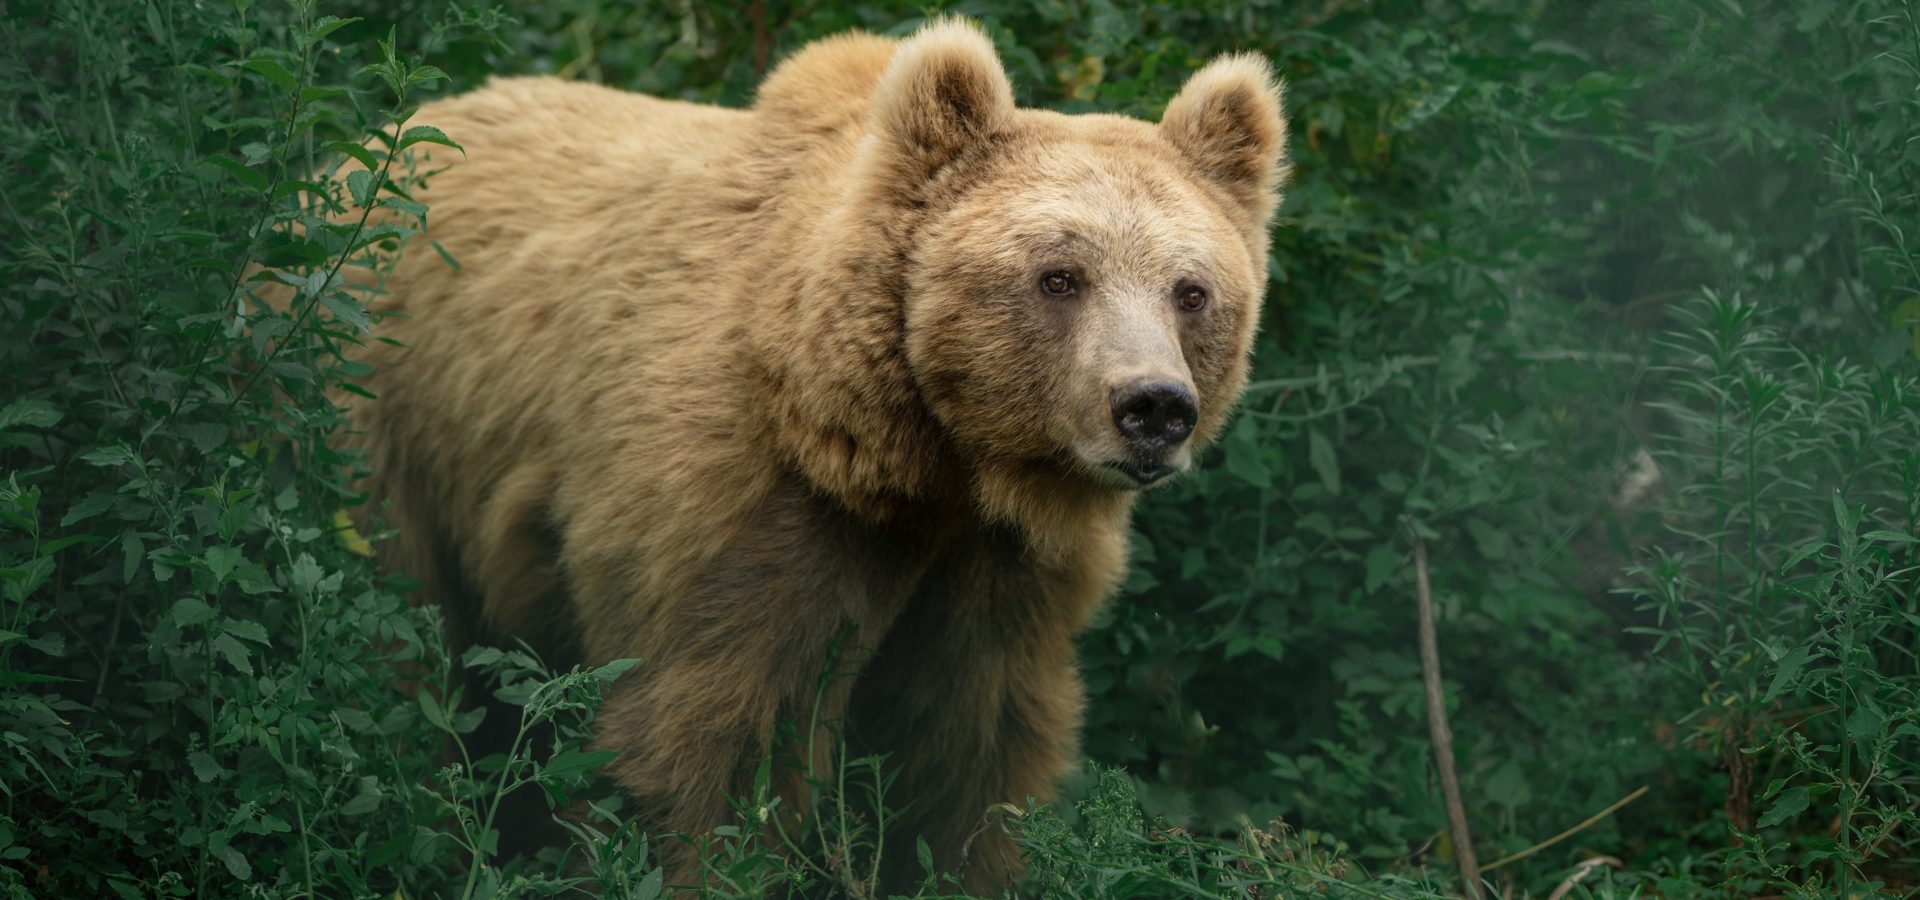 Grizzly bears: North America's brown bear